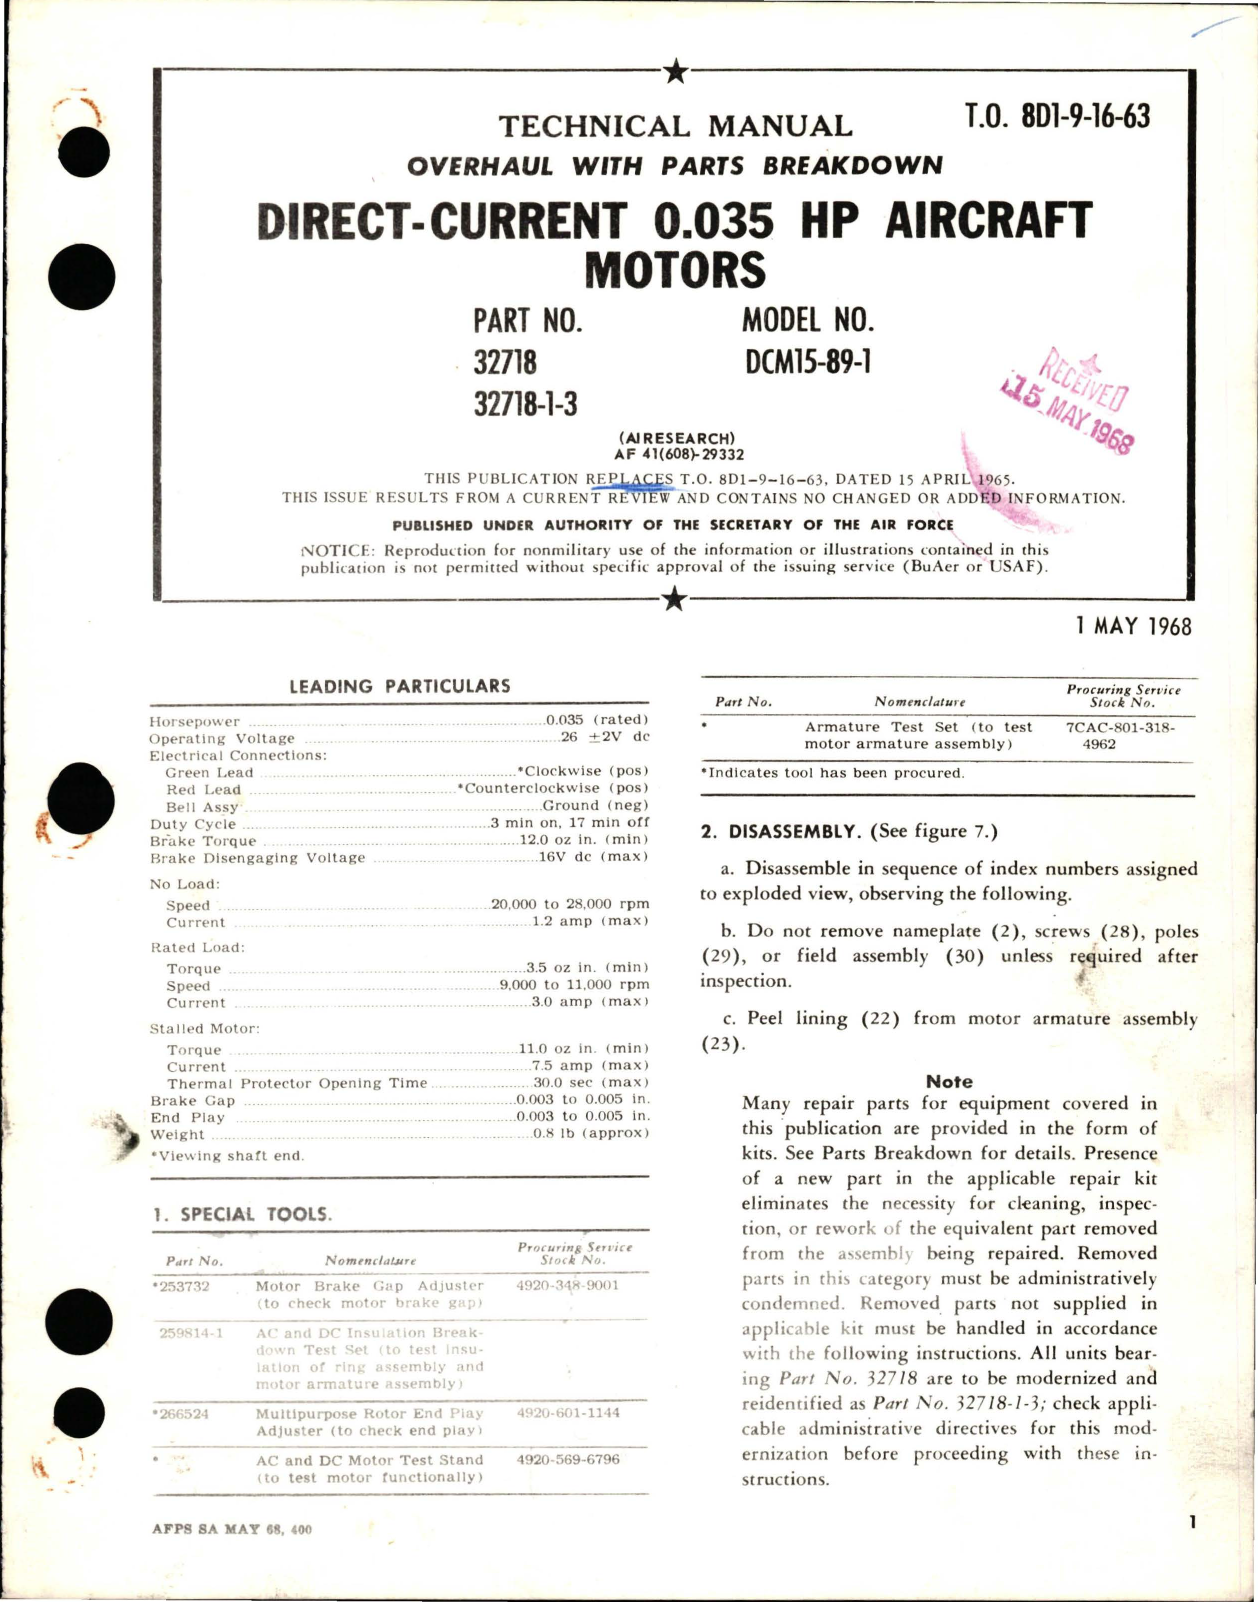 Sample page 1 from AirCorps Library document: Overhaul with Parts Breakdown for Direct-Current Motors - 0.035 HP - Parts 32718, 32718-1-3 - Model DCM15-89-1